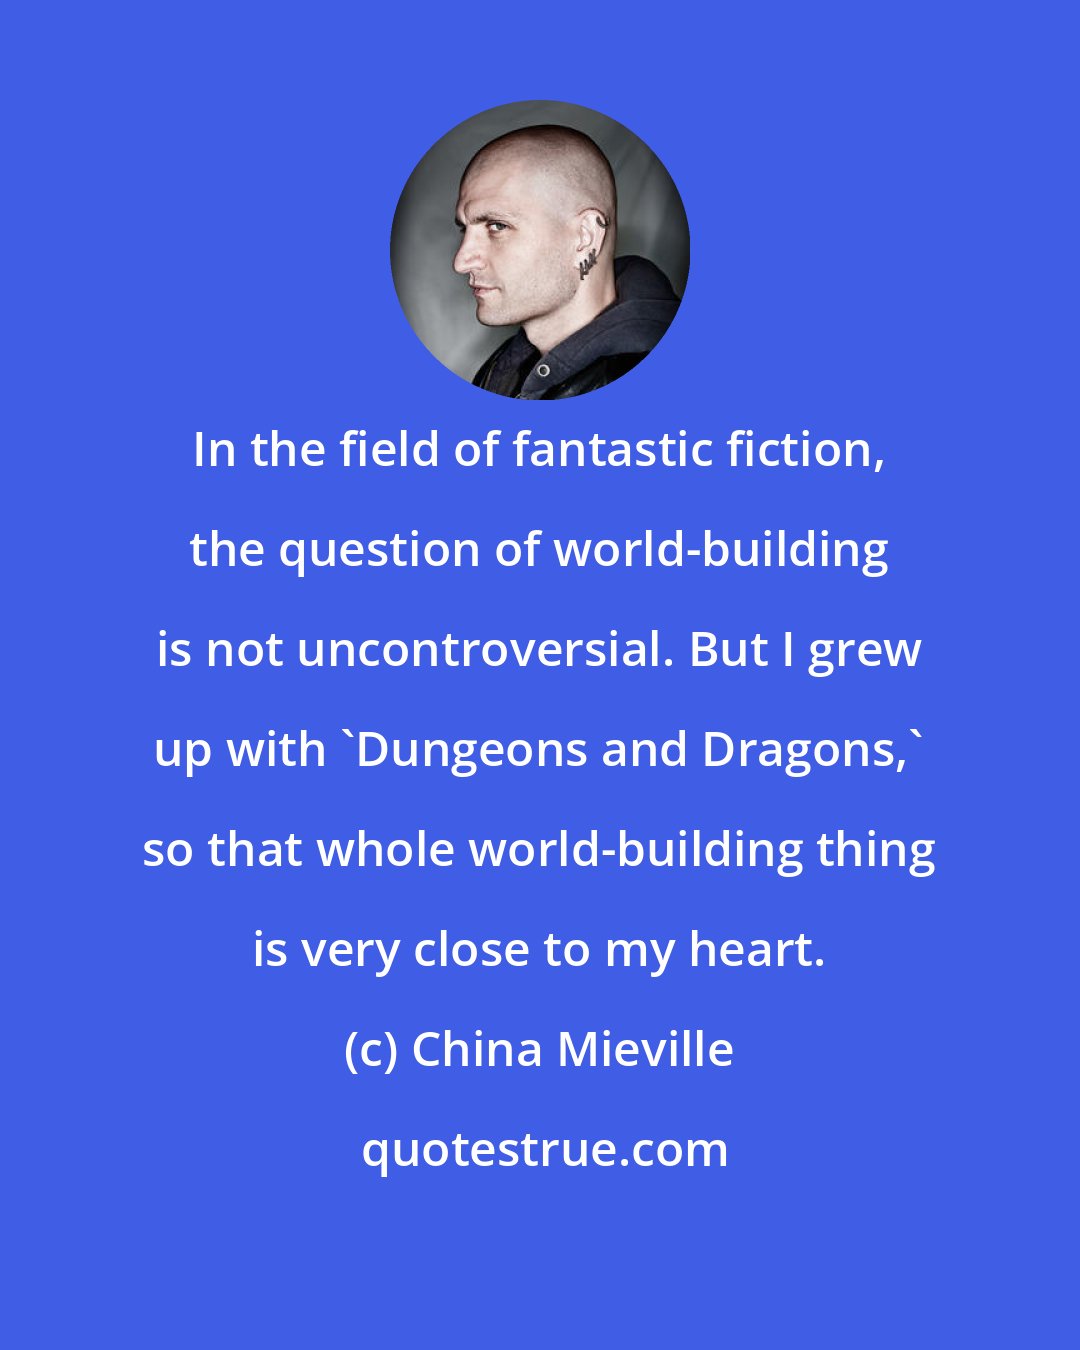 China Mieville: In the field of fantastic fiction, the question of world-building is not uncontroversial. But I grew up with 'Dungeons and Dragons,' so that whole world-building thing is very close to my heart.